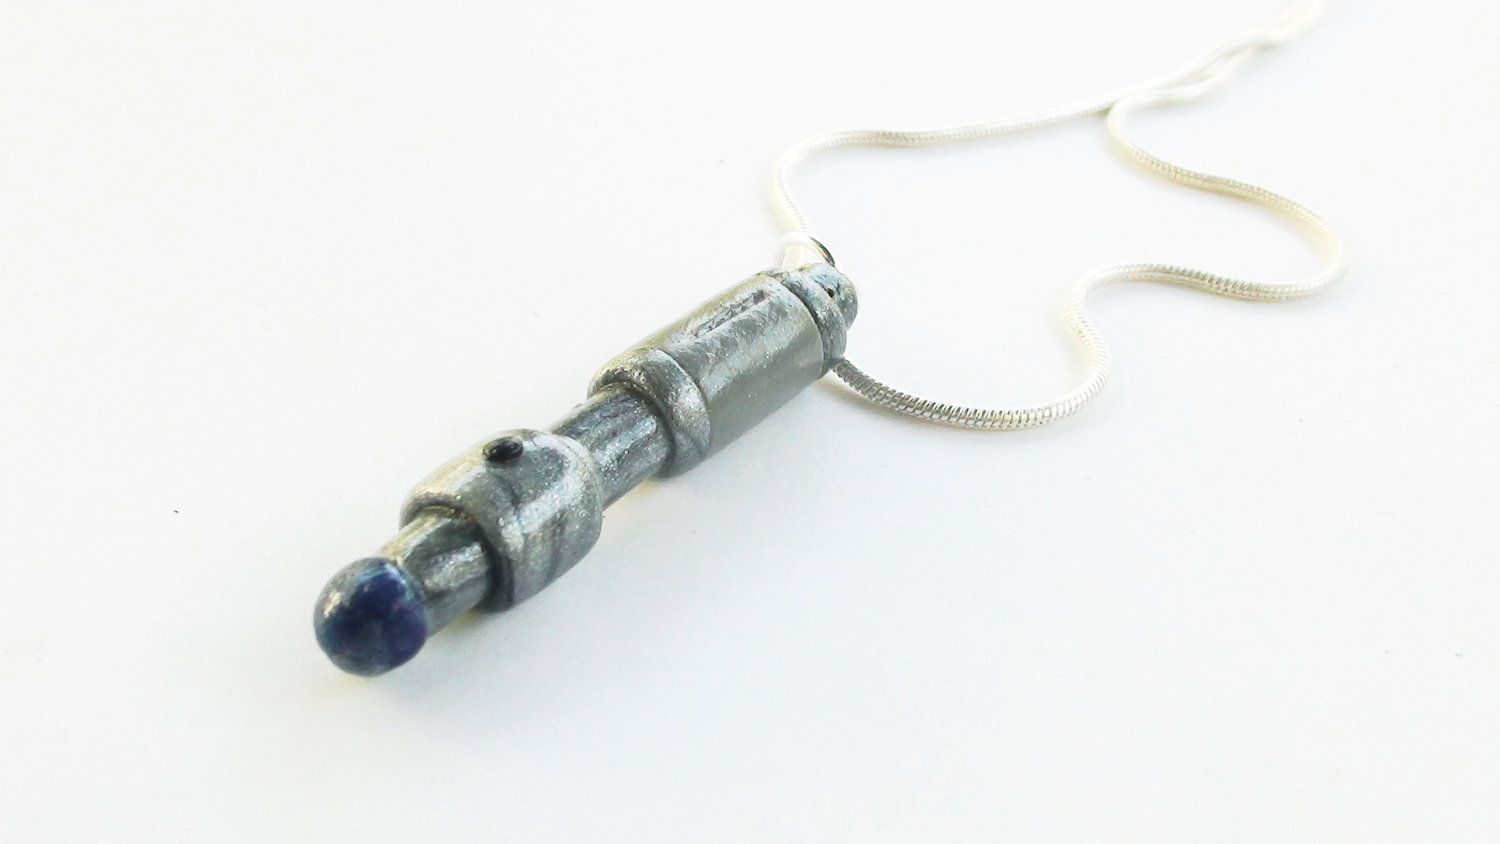 Doctor Who 10th Doctor Sonic Screwdriver Necklace. $7.00, via Etsy.